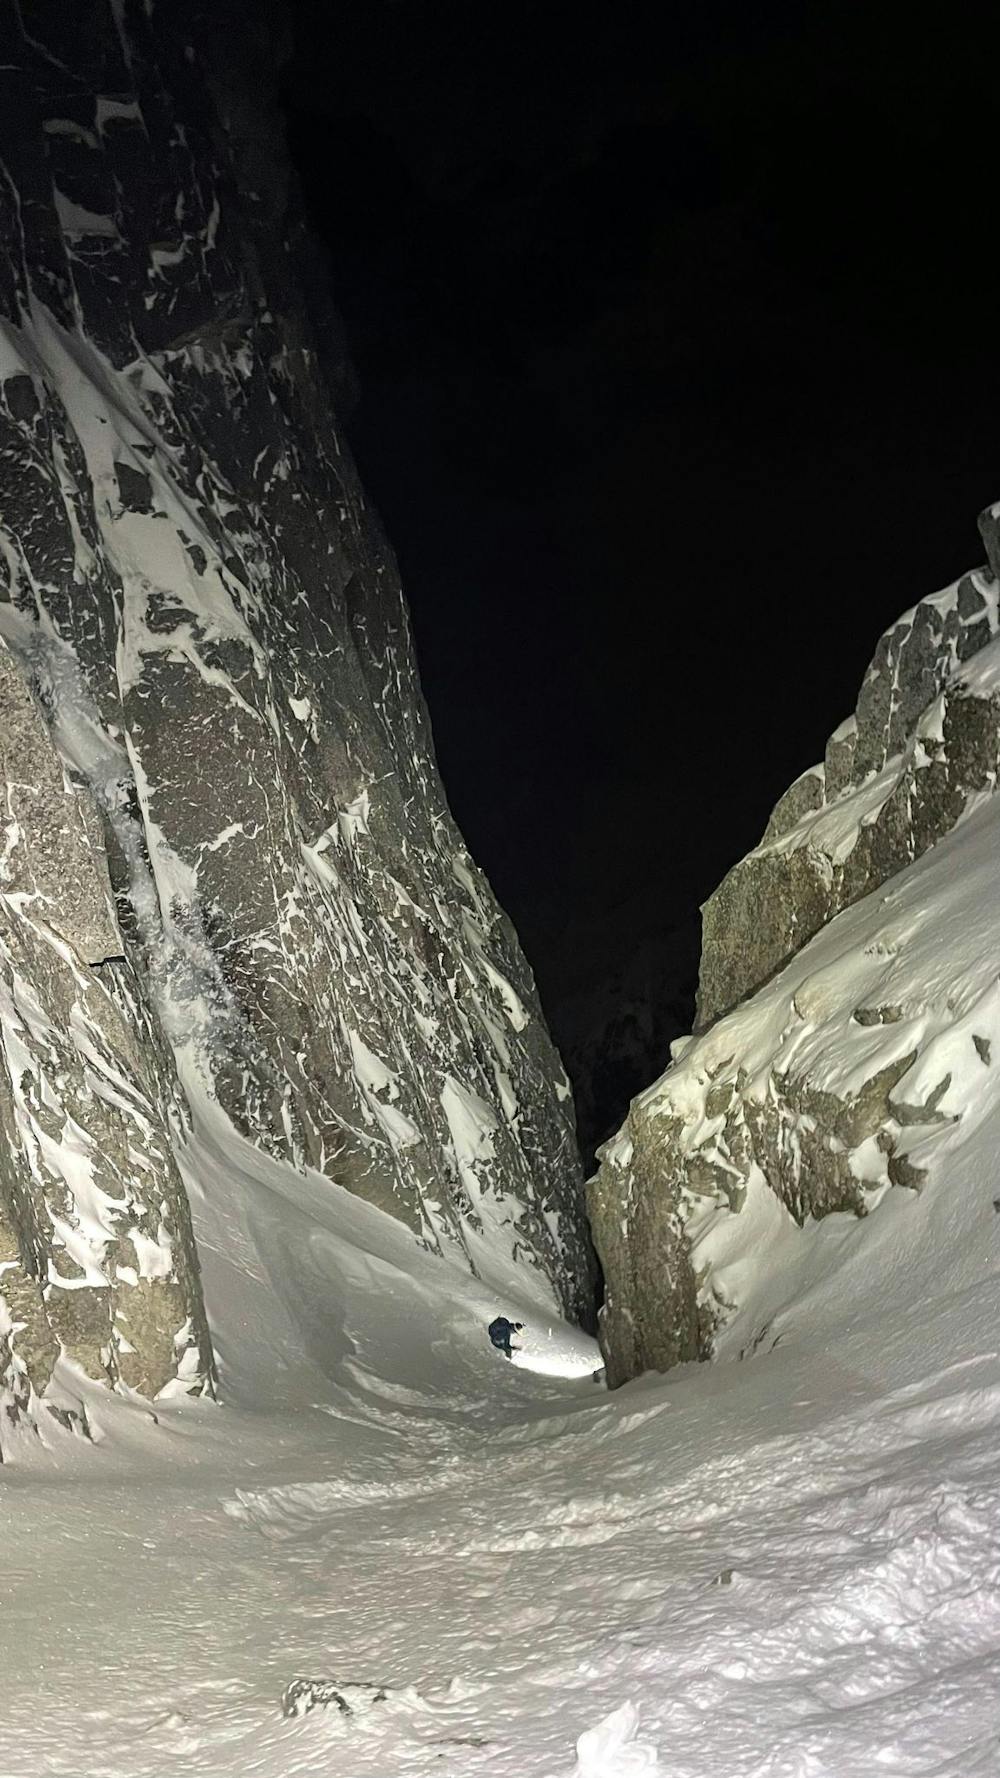 Skiing the couloir at night!